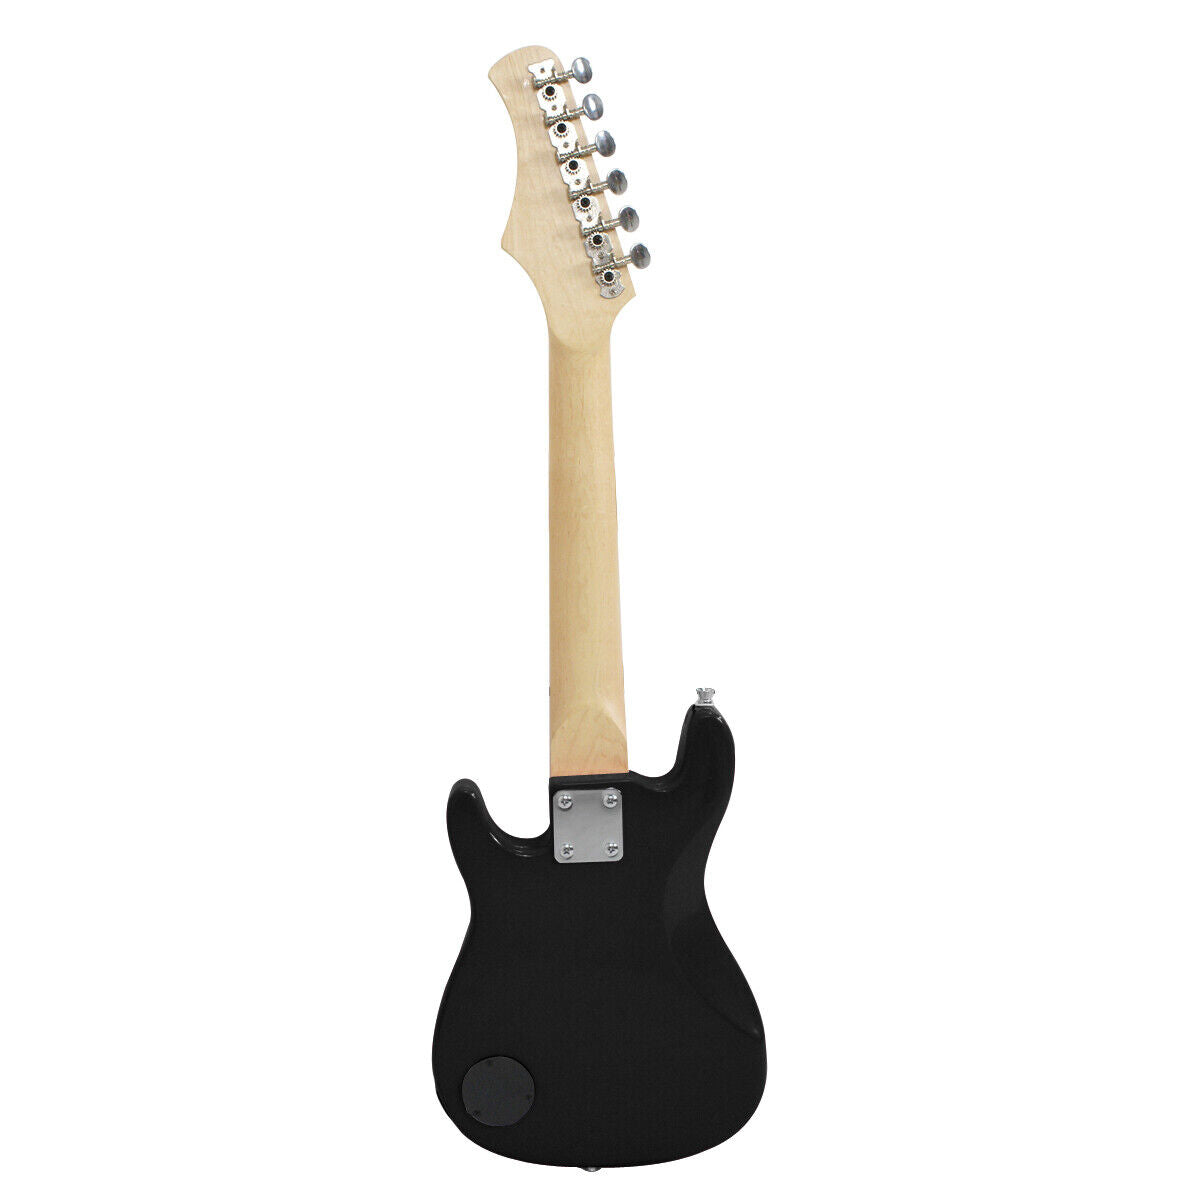 30" Electric Guitar Kids Beginner Guitar With Amp Case Accessories Pack Black